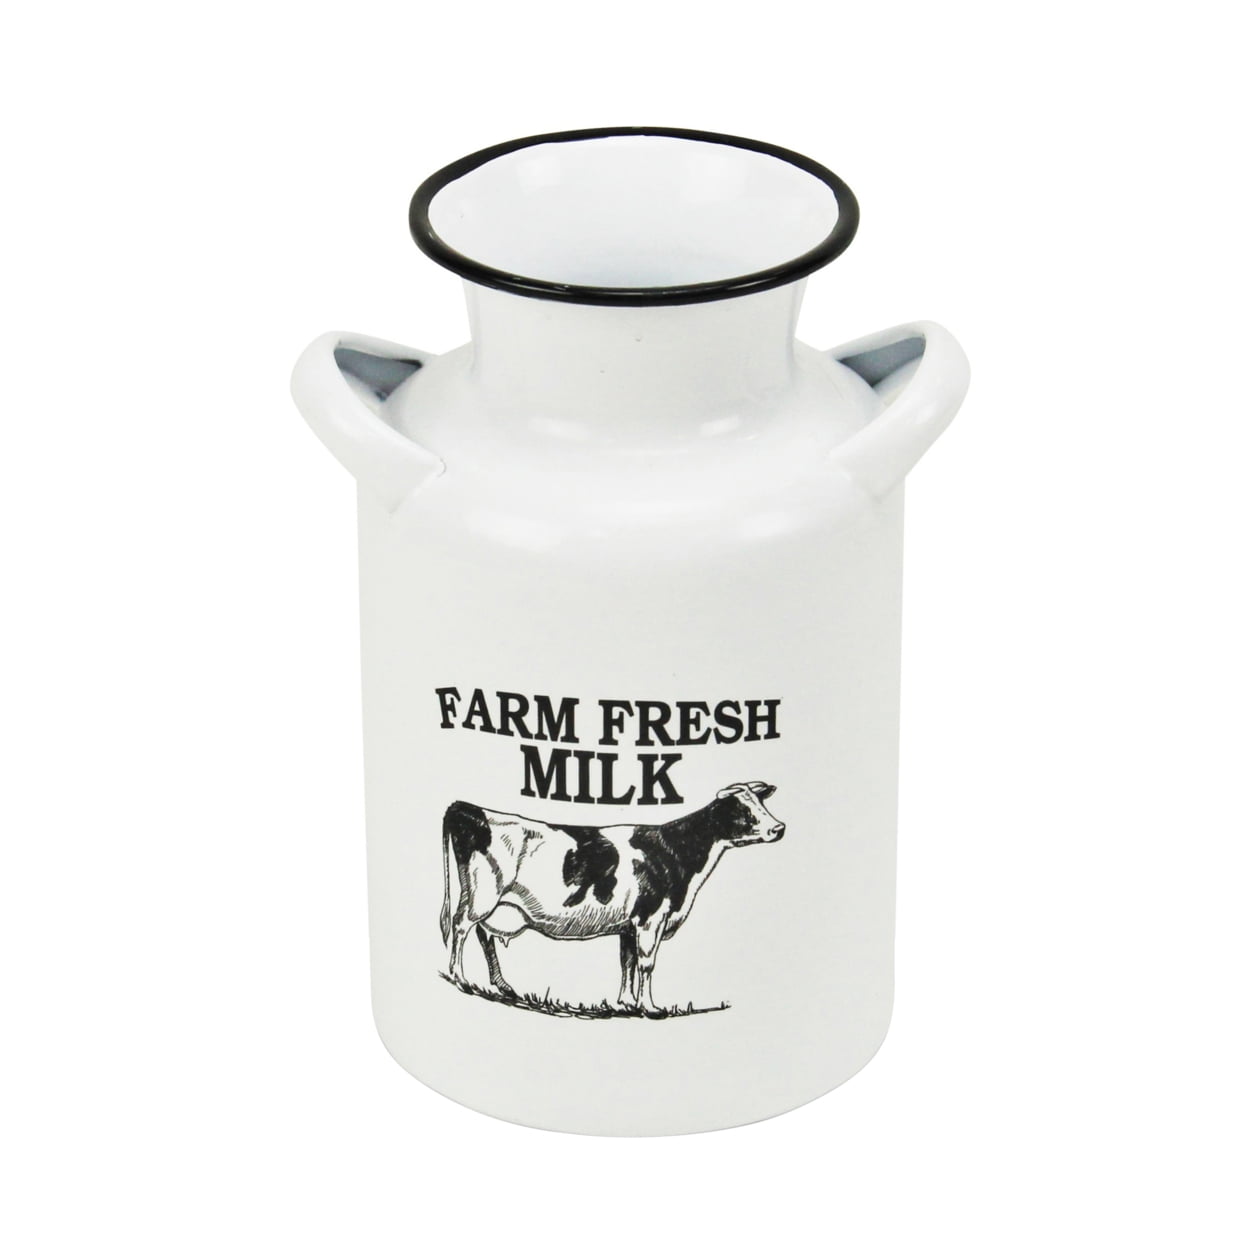 Picture of Cheungs 5436S White Metal Lacquered Finish Milk Jug with Cow with Farm Fresh Milk Text - Small